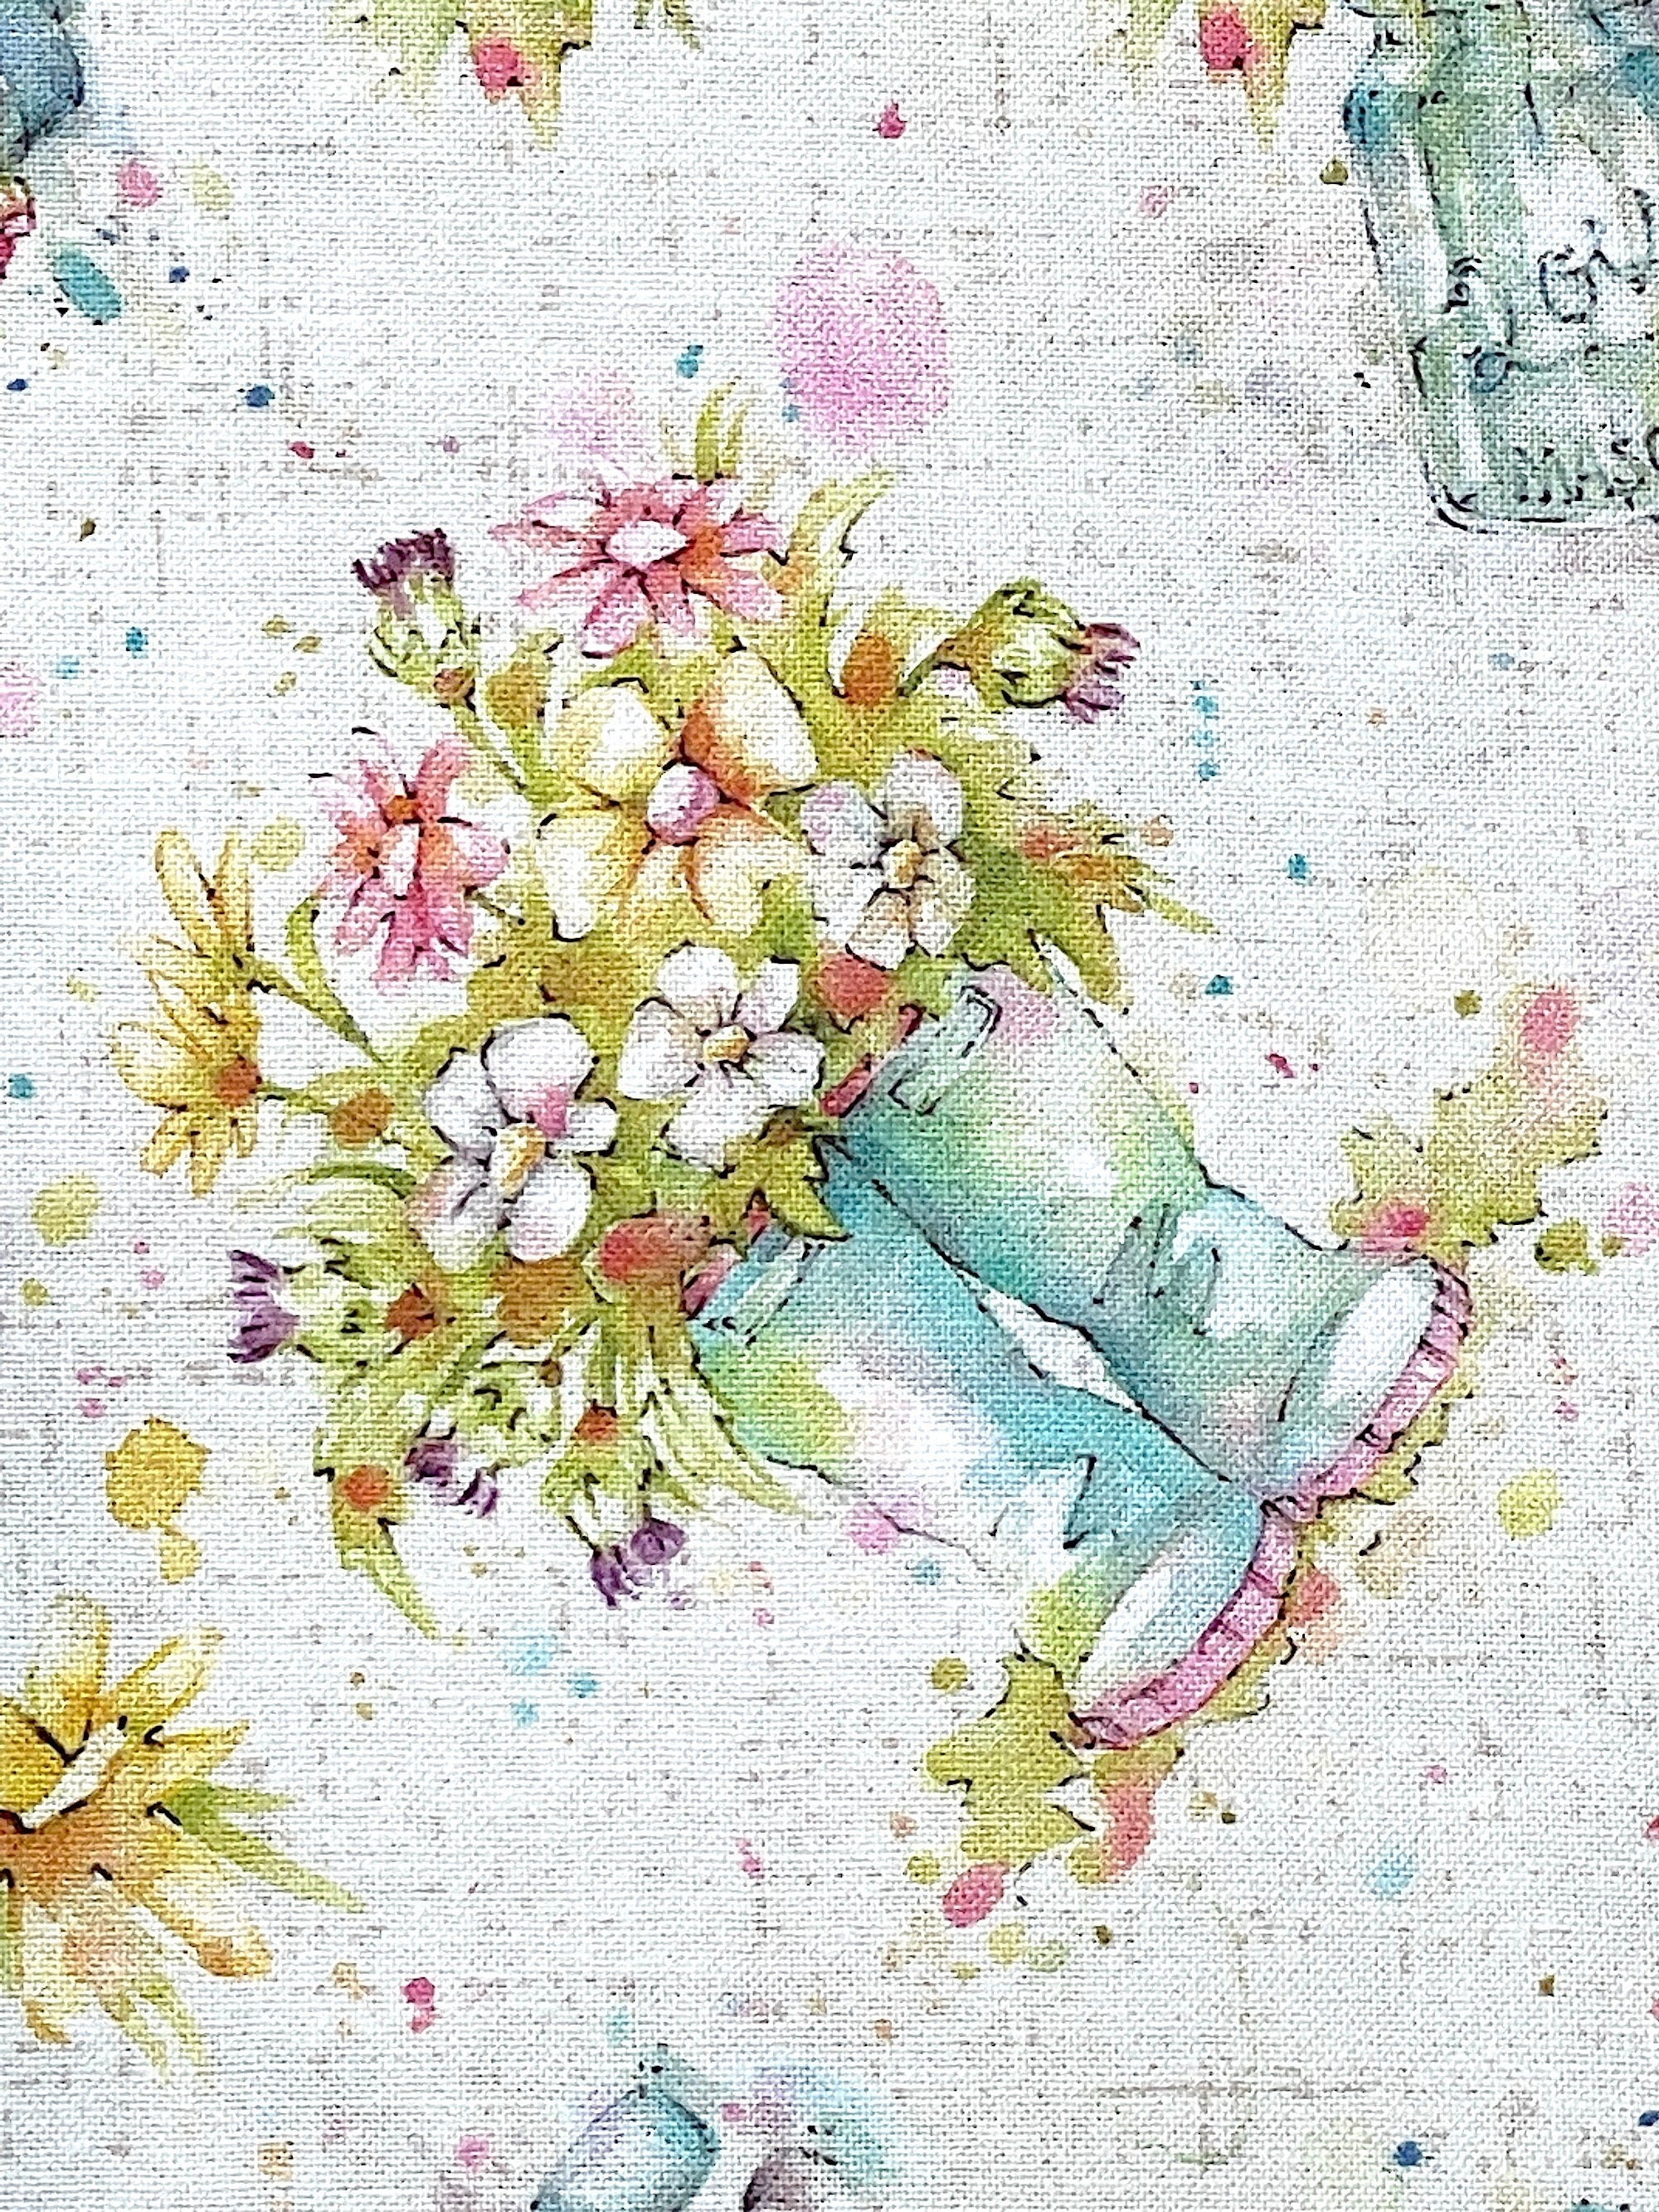 Close up of a pair of boots full of flowers.